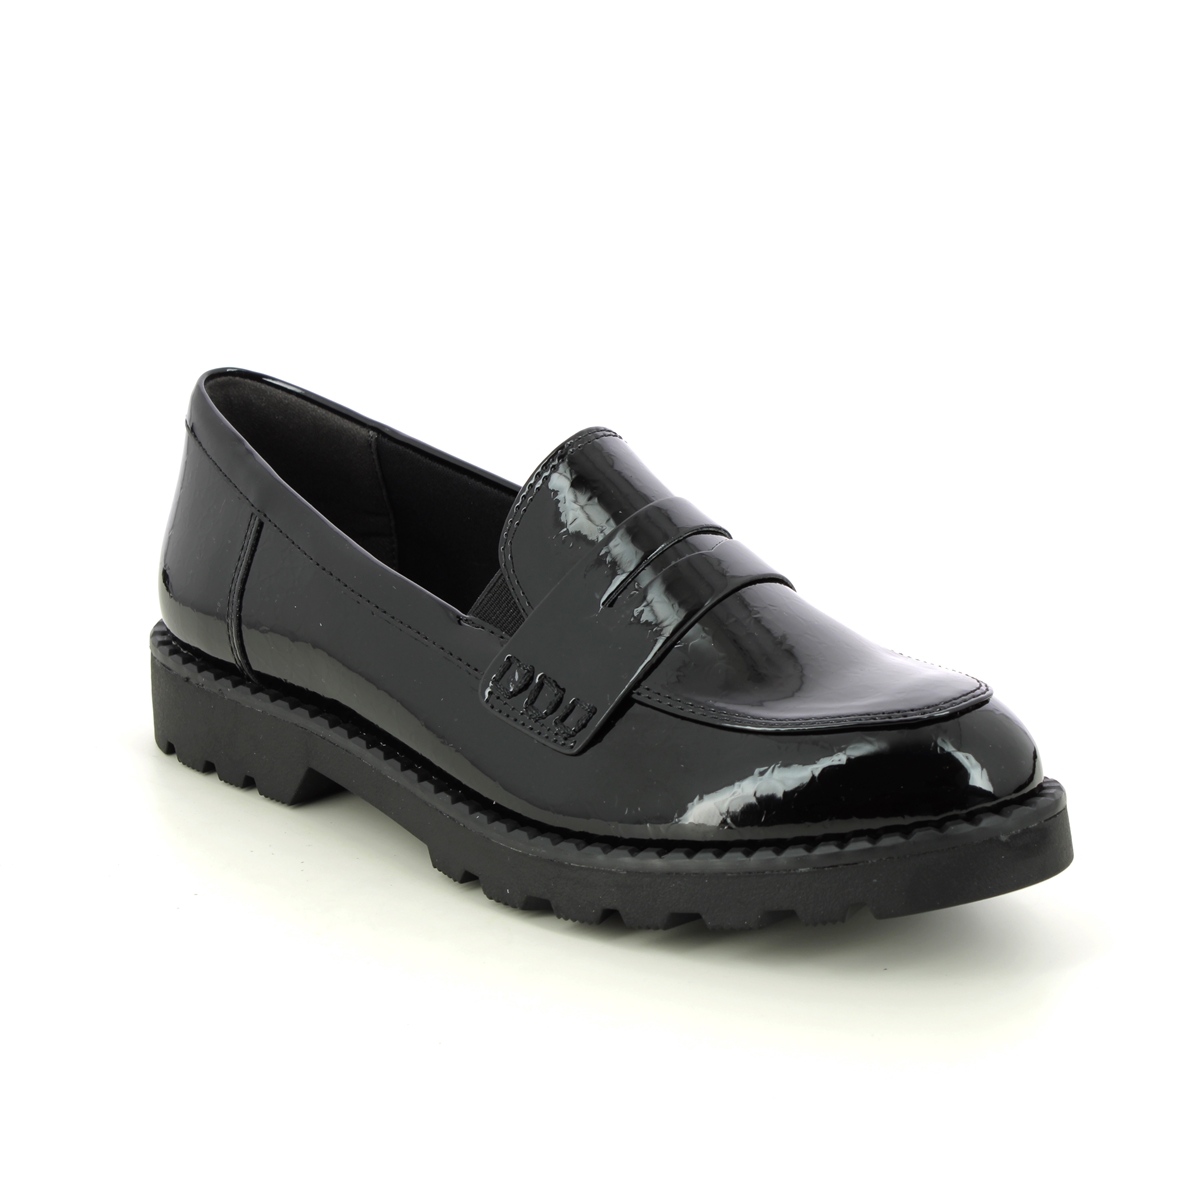 Tamaris Crissy 25 Black Patent Womens Loafers 24312-29-063 In Size 37 In Plain Black Patent